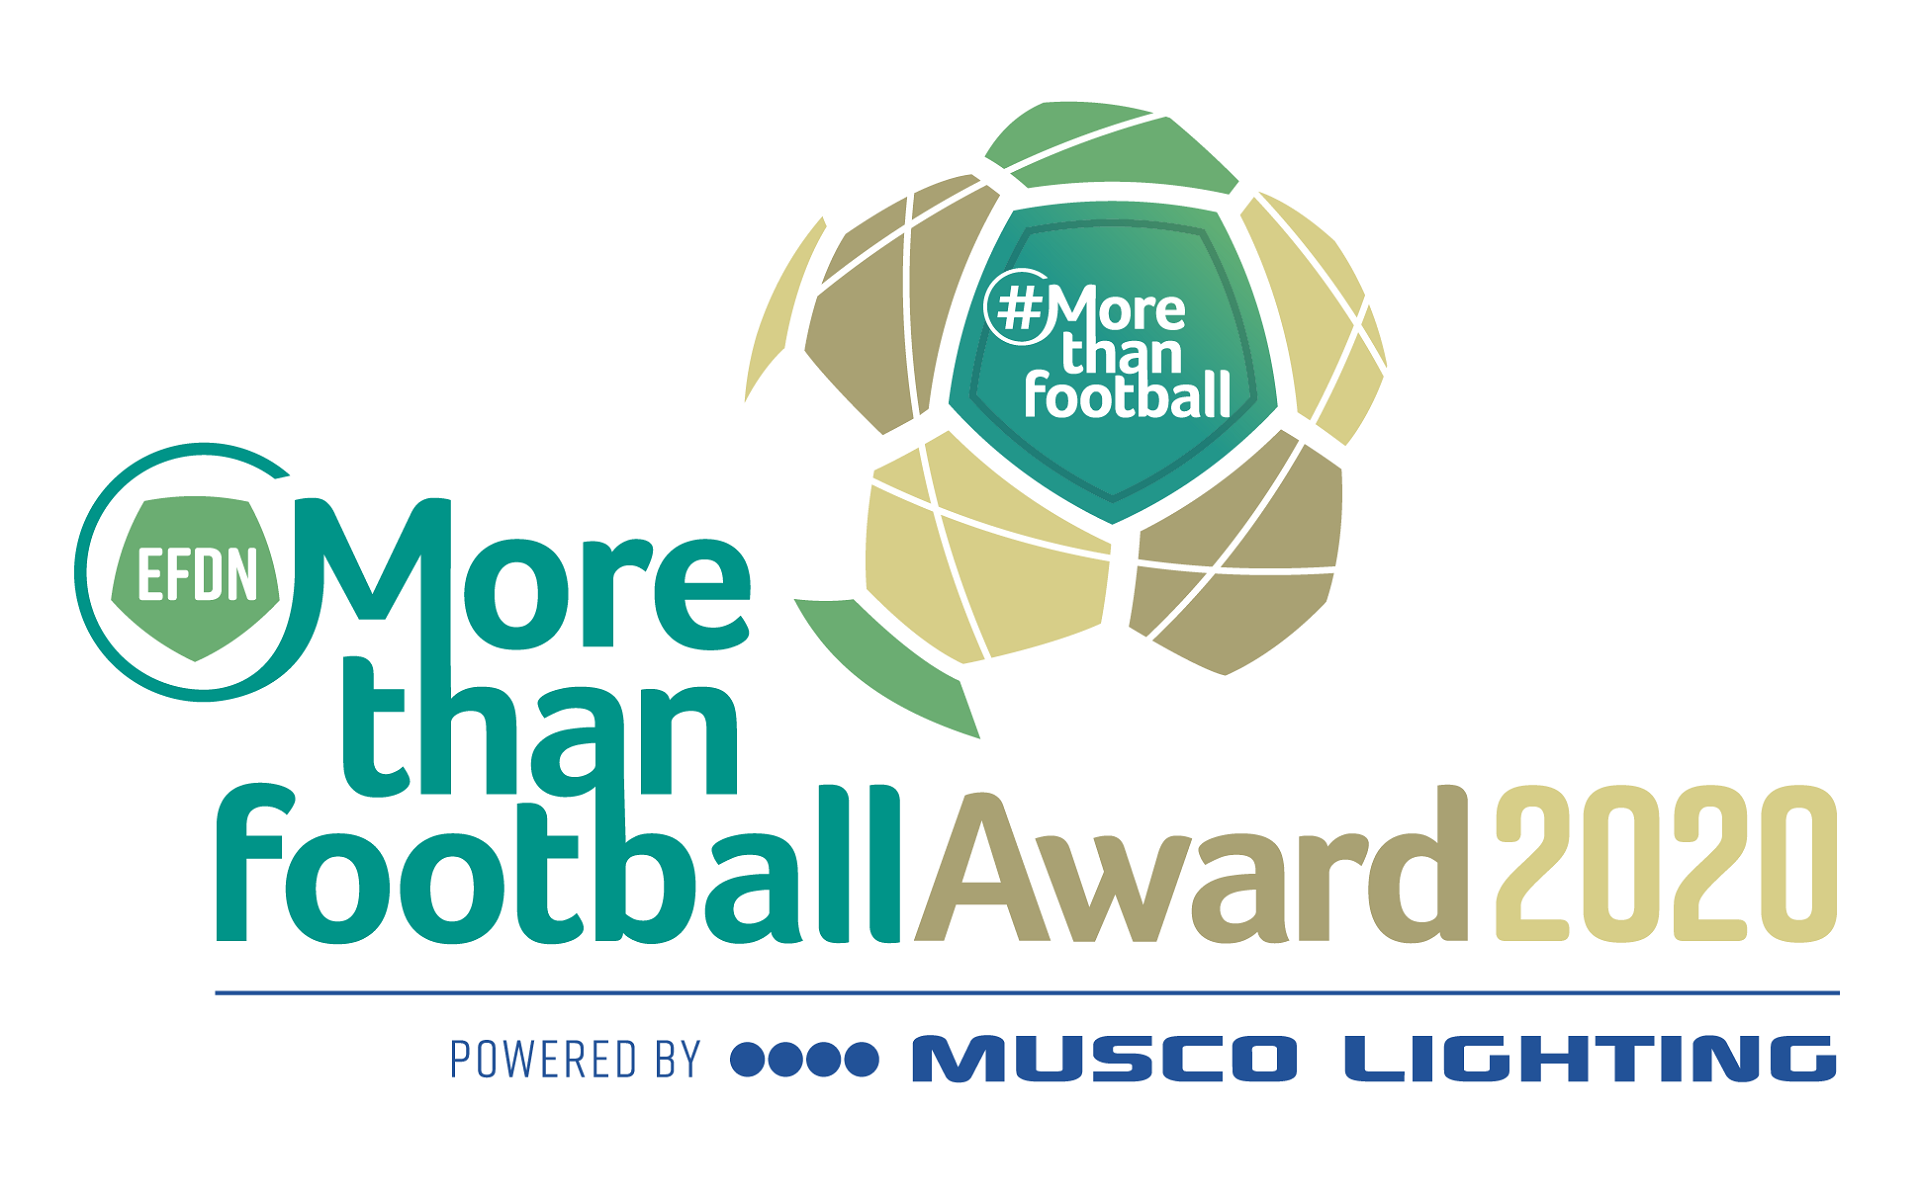 Musco and join forces to promote power of football